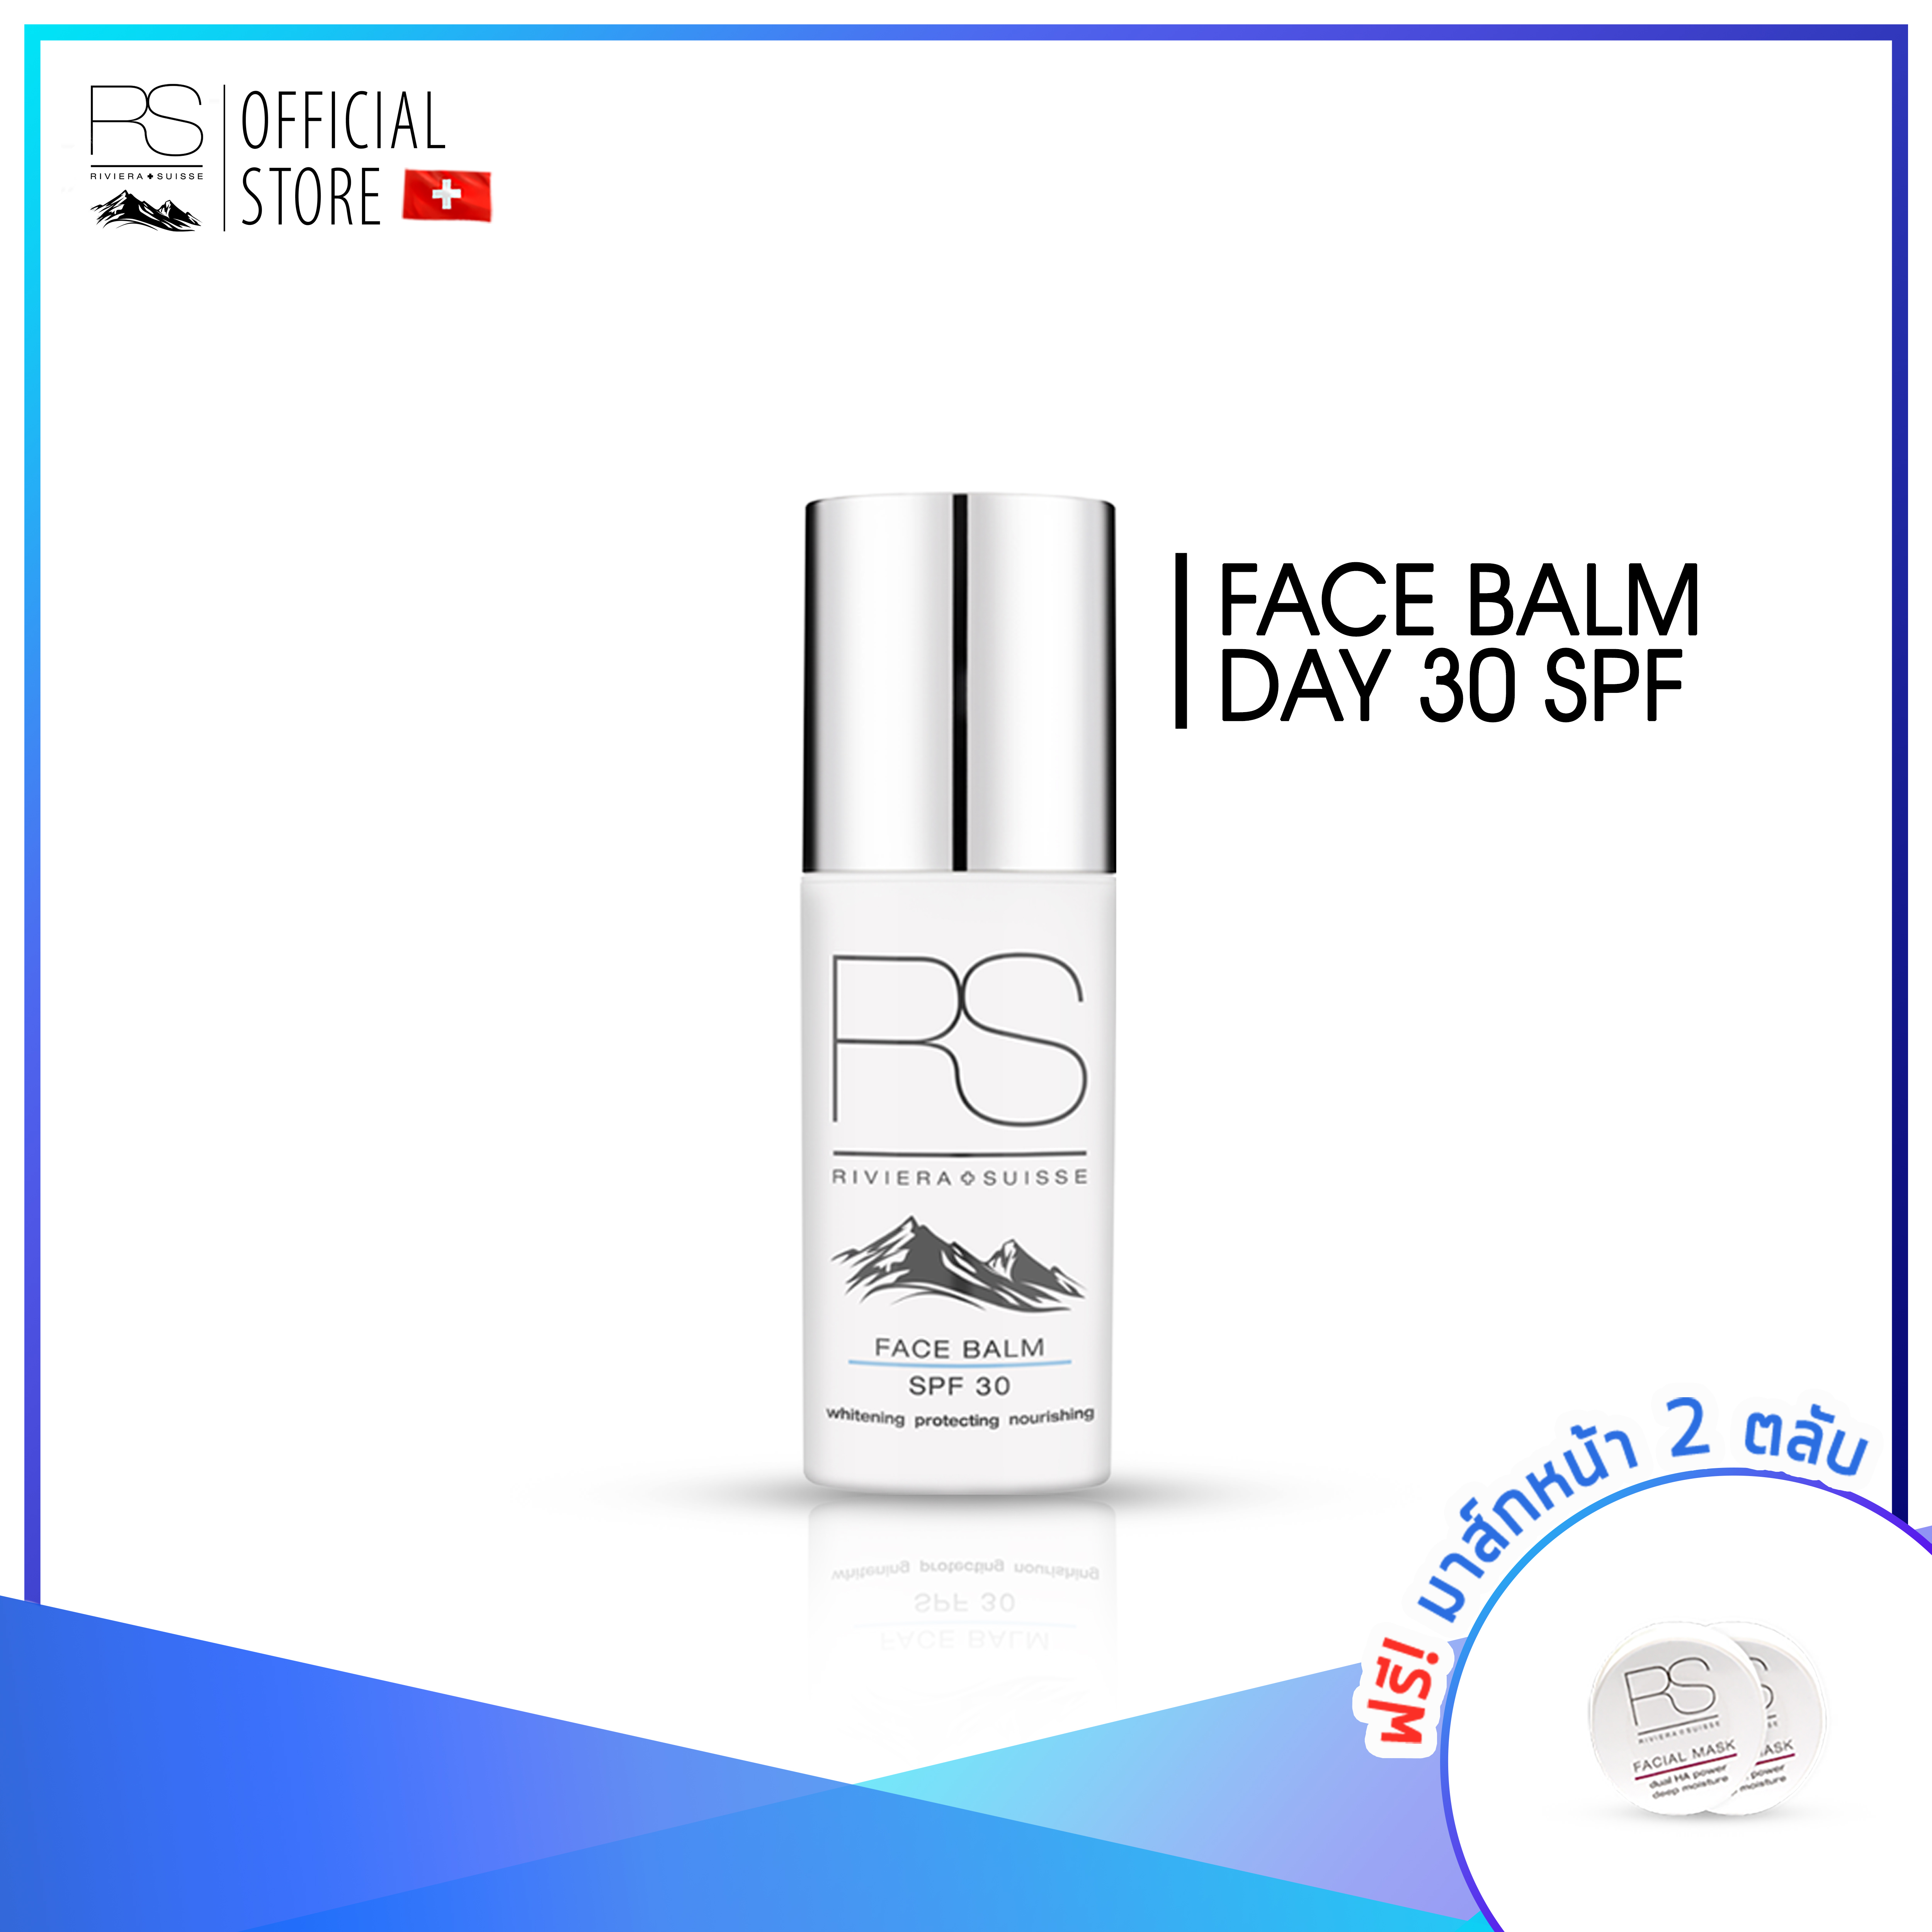 Riviera Suisse - Face Balm SPF30 PA+++ 30/50ml